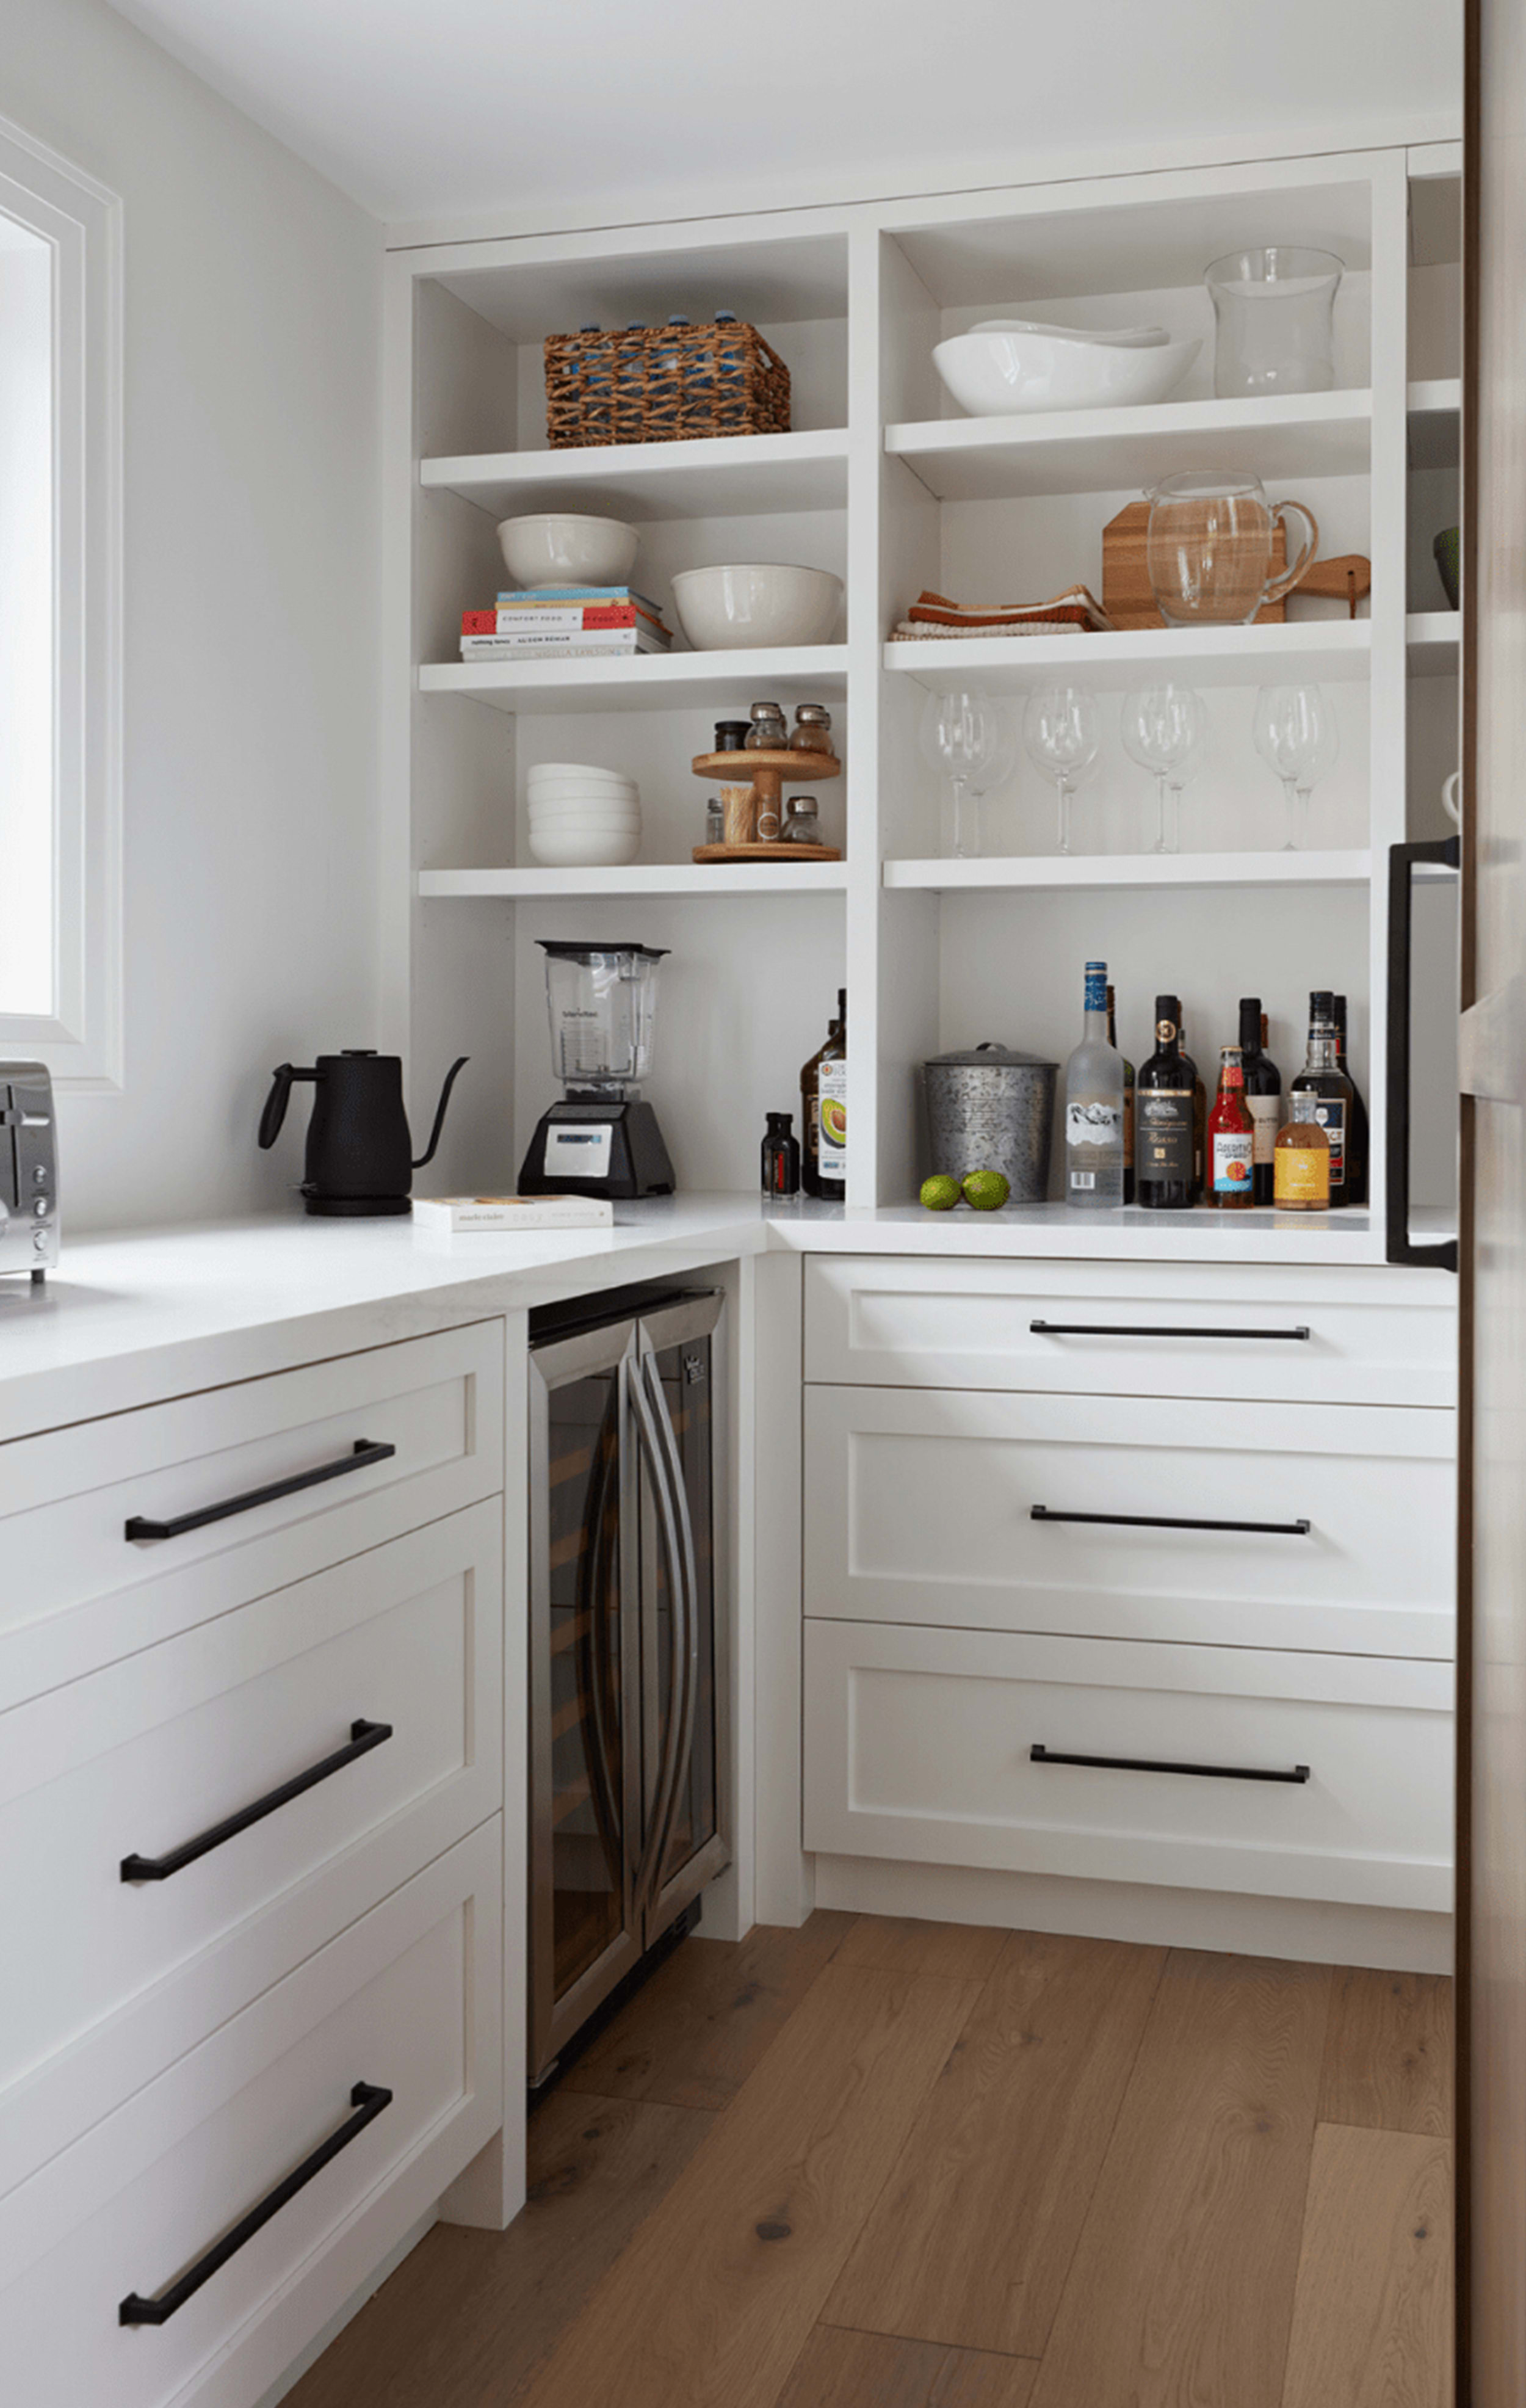 Bright butler's pantry with white cabinetry and open shelving up top with serving dishes and appliances displayed